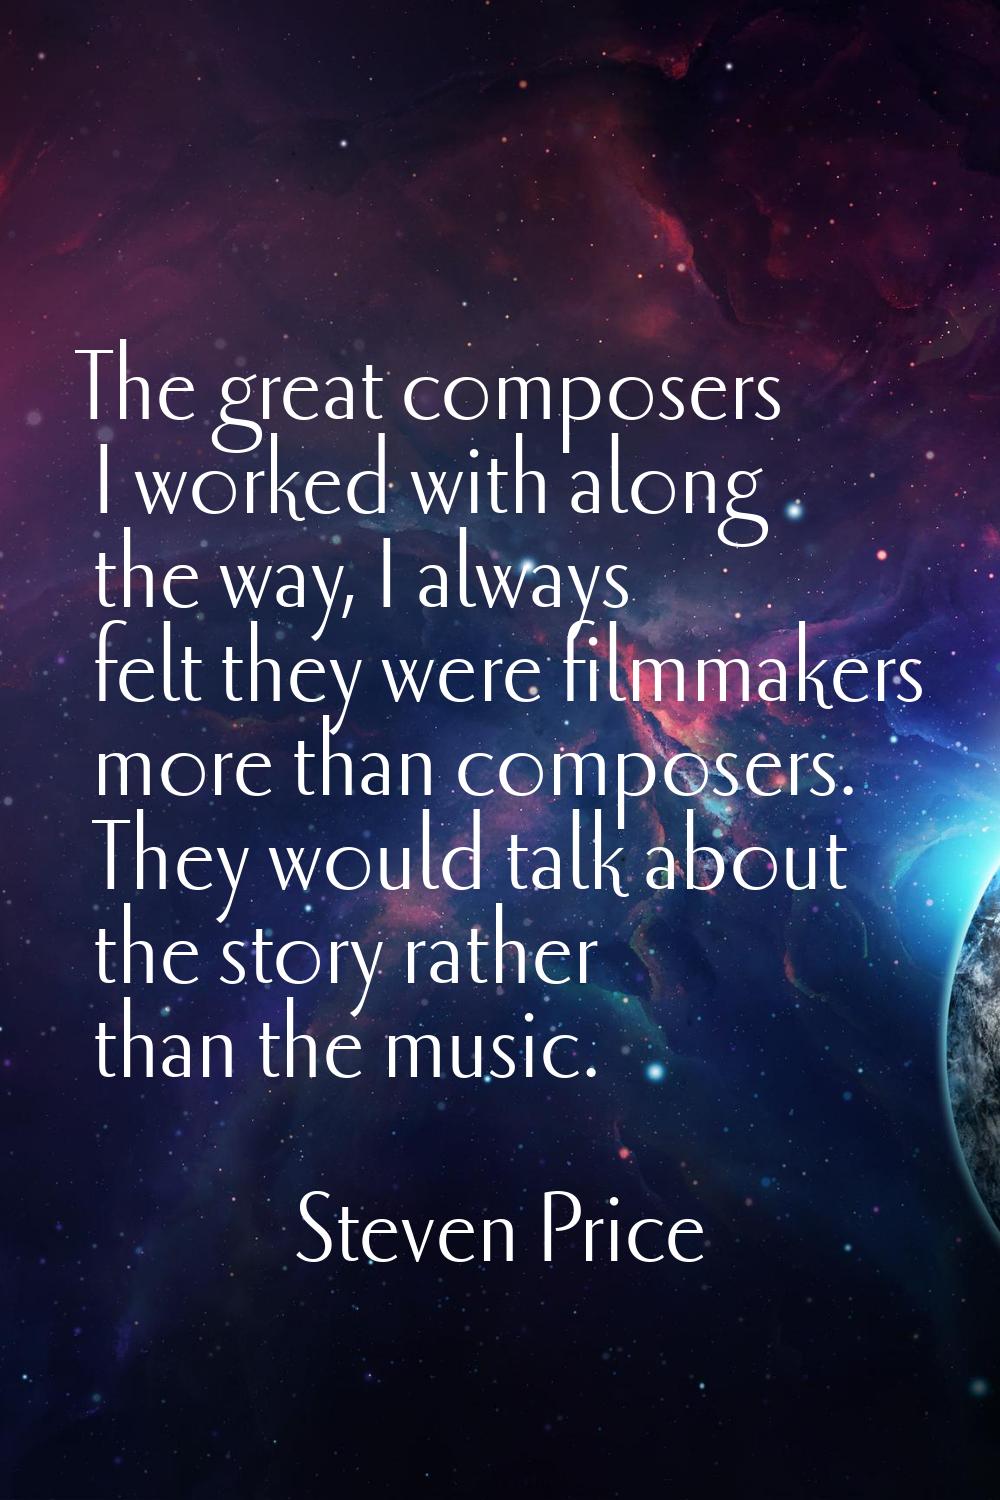 The great composers I worked with along the way, I always felt they were filmmakers more than compo